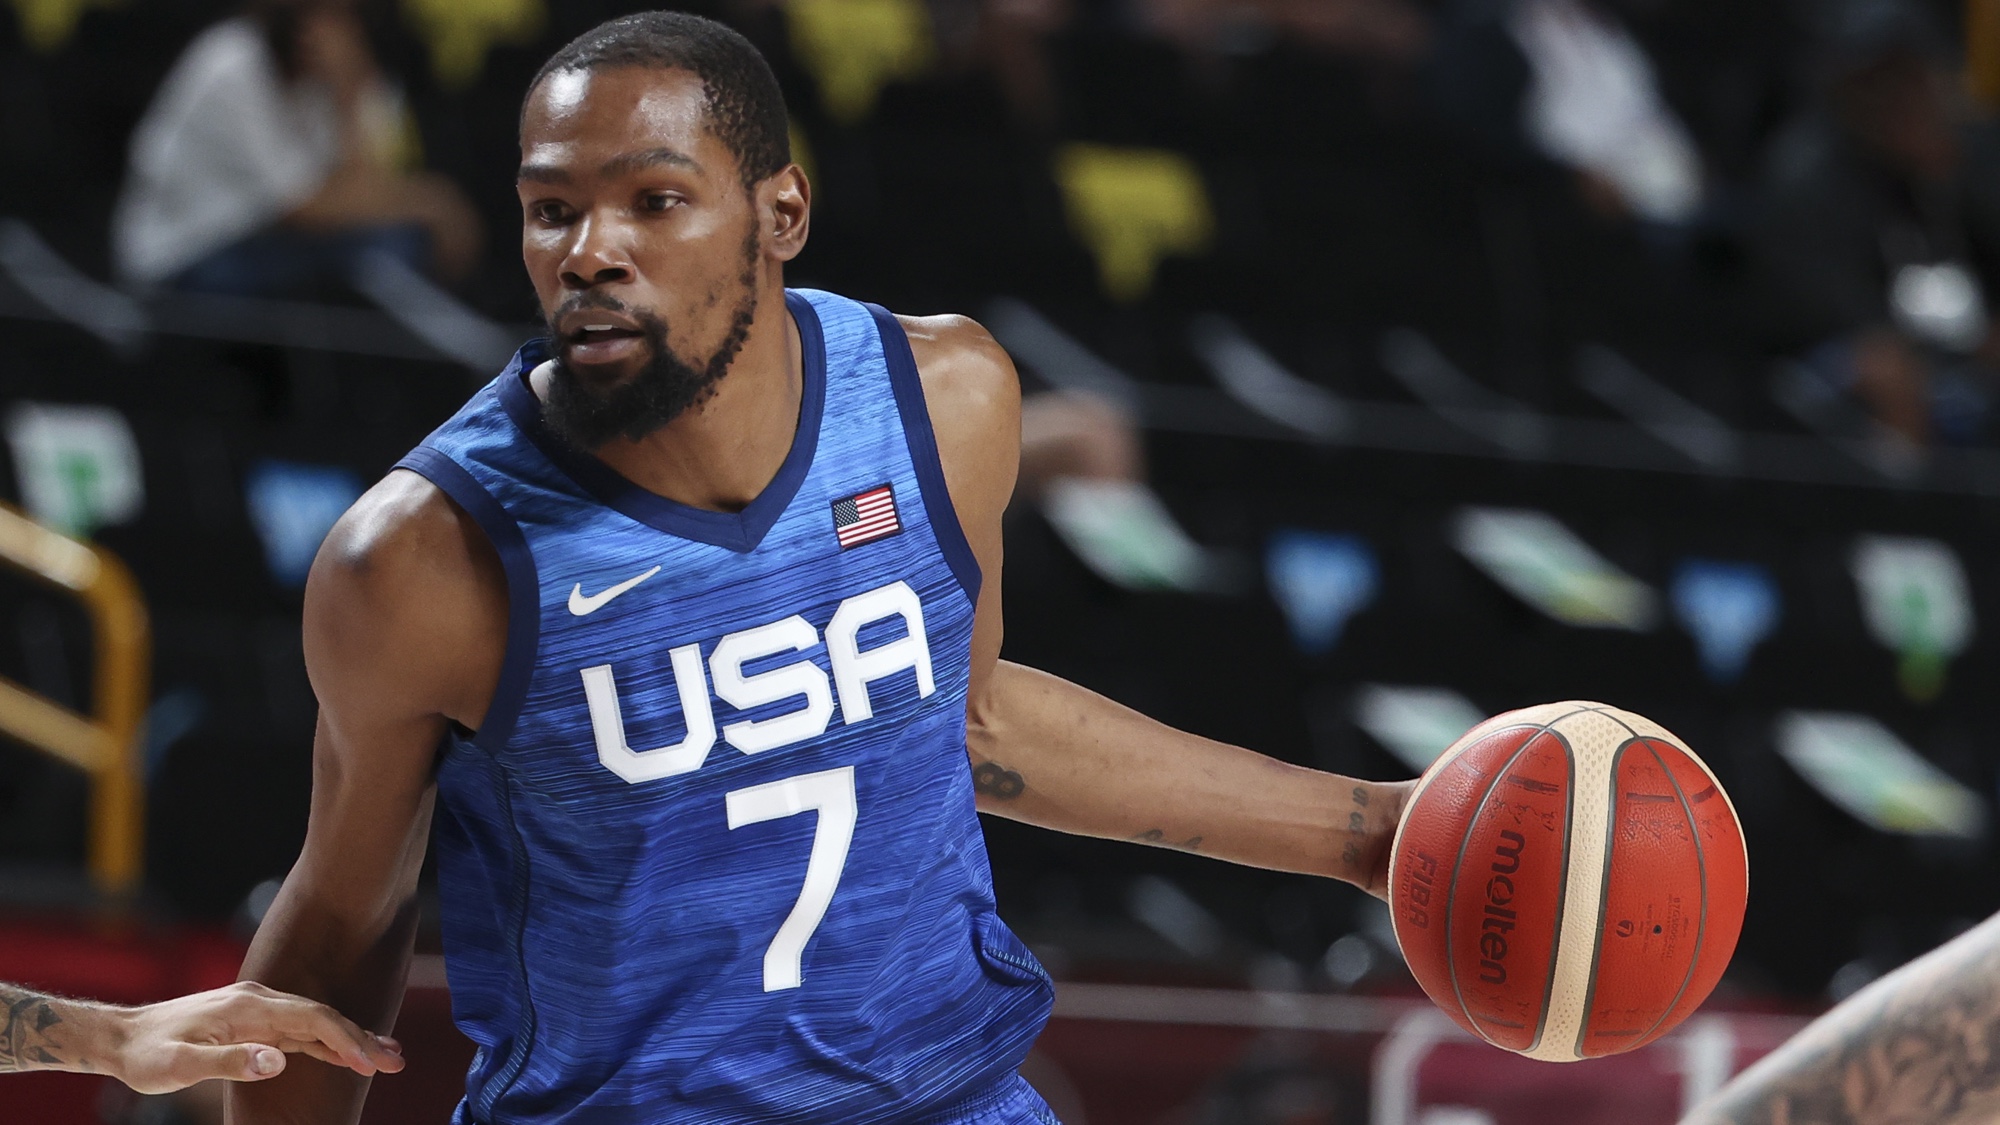 Team Usa Vs Iran Men S Basketball Live Stream Olympics Channels Start Time And How To Watch Online Tom S Guide